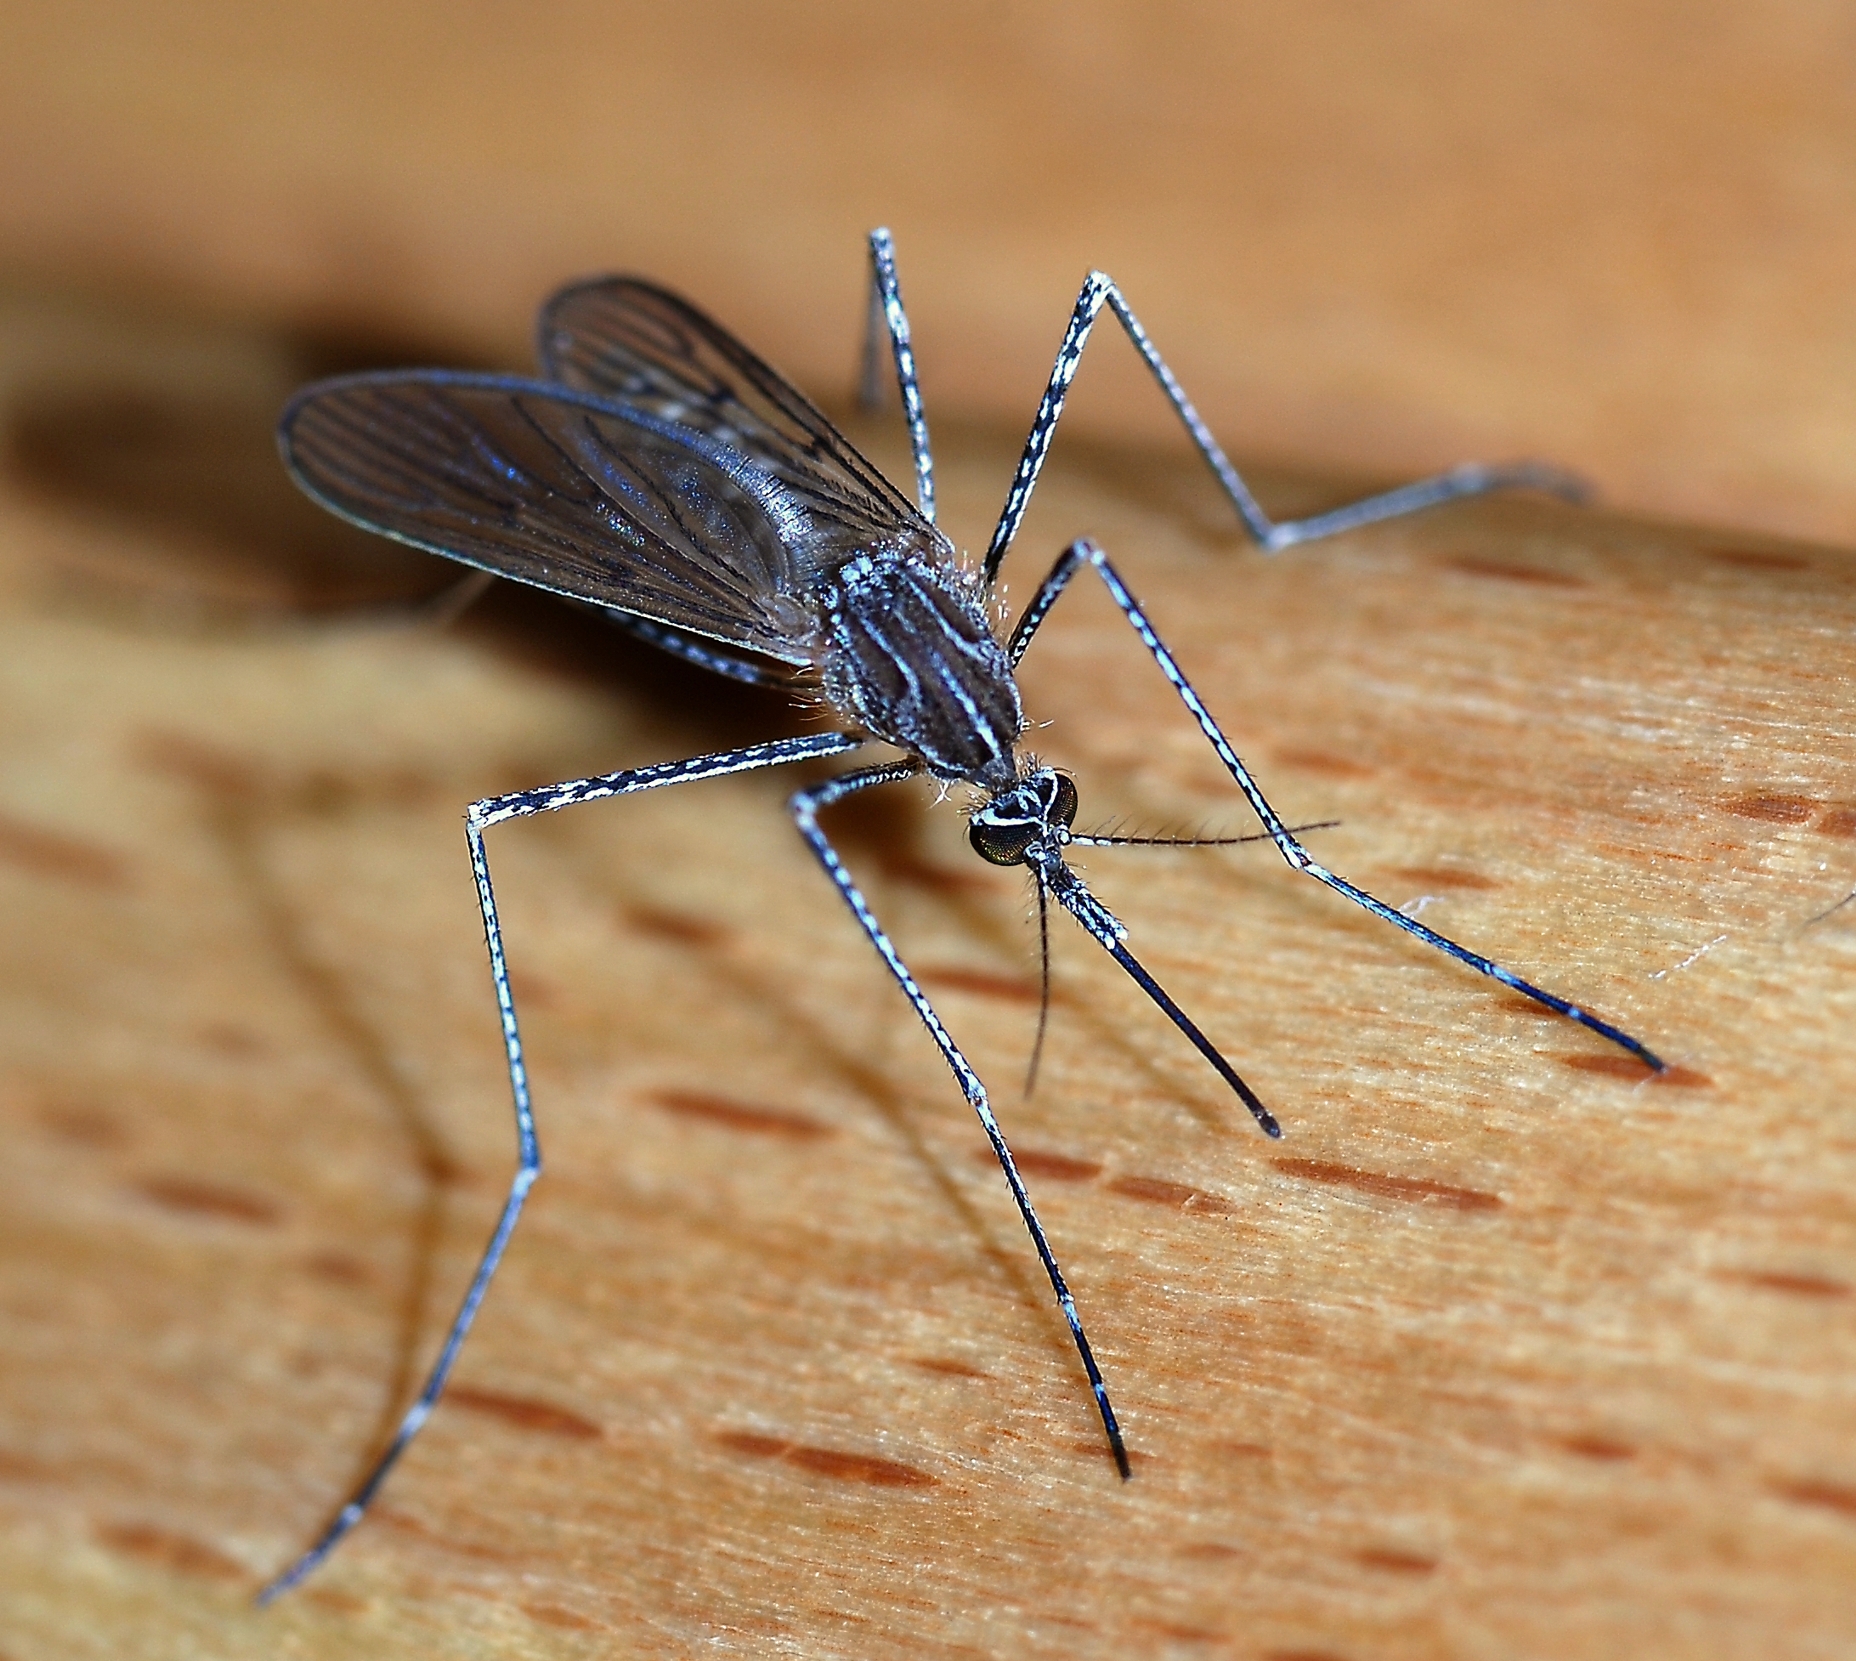 Nationwide alert issued in the US as five residents get malaria from mosquito bites in Florida and Texas.